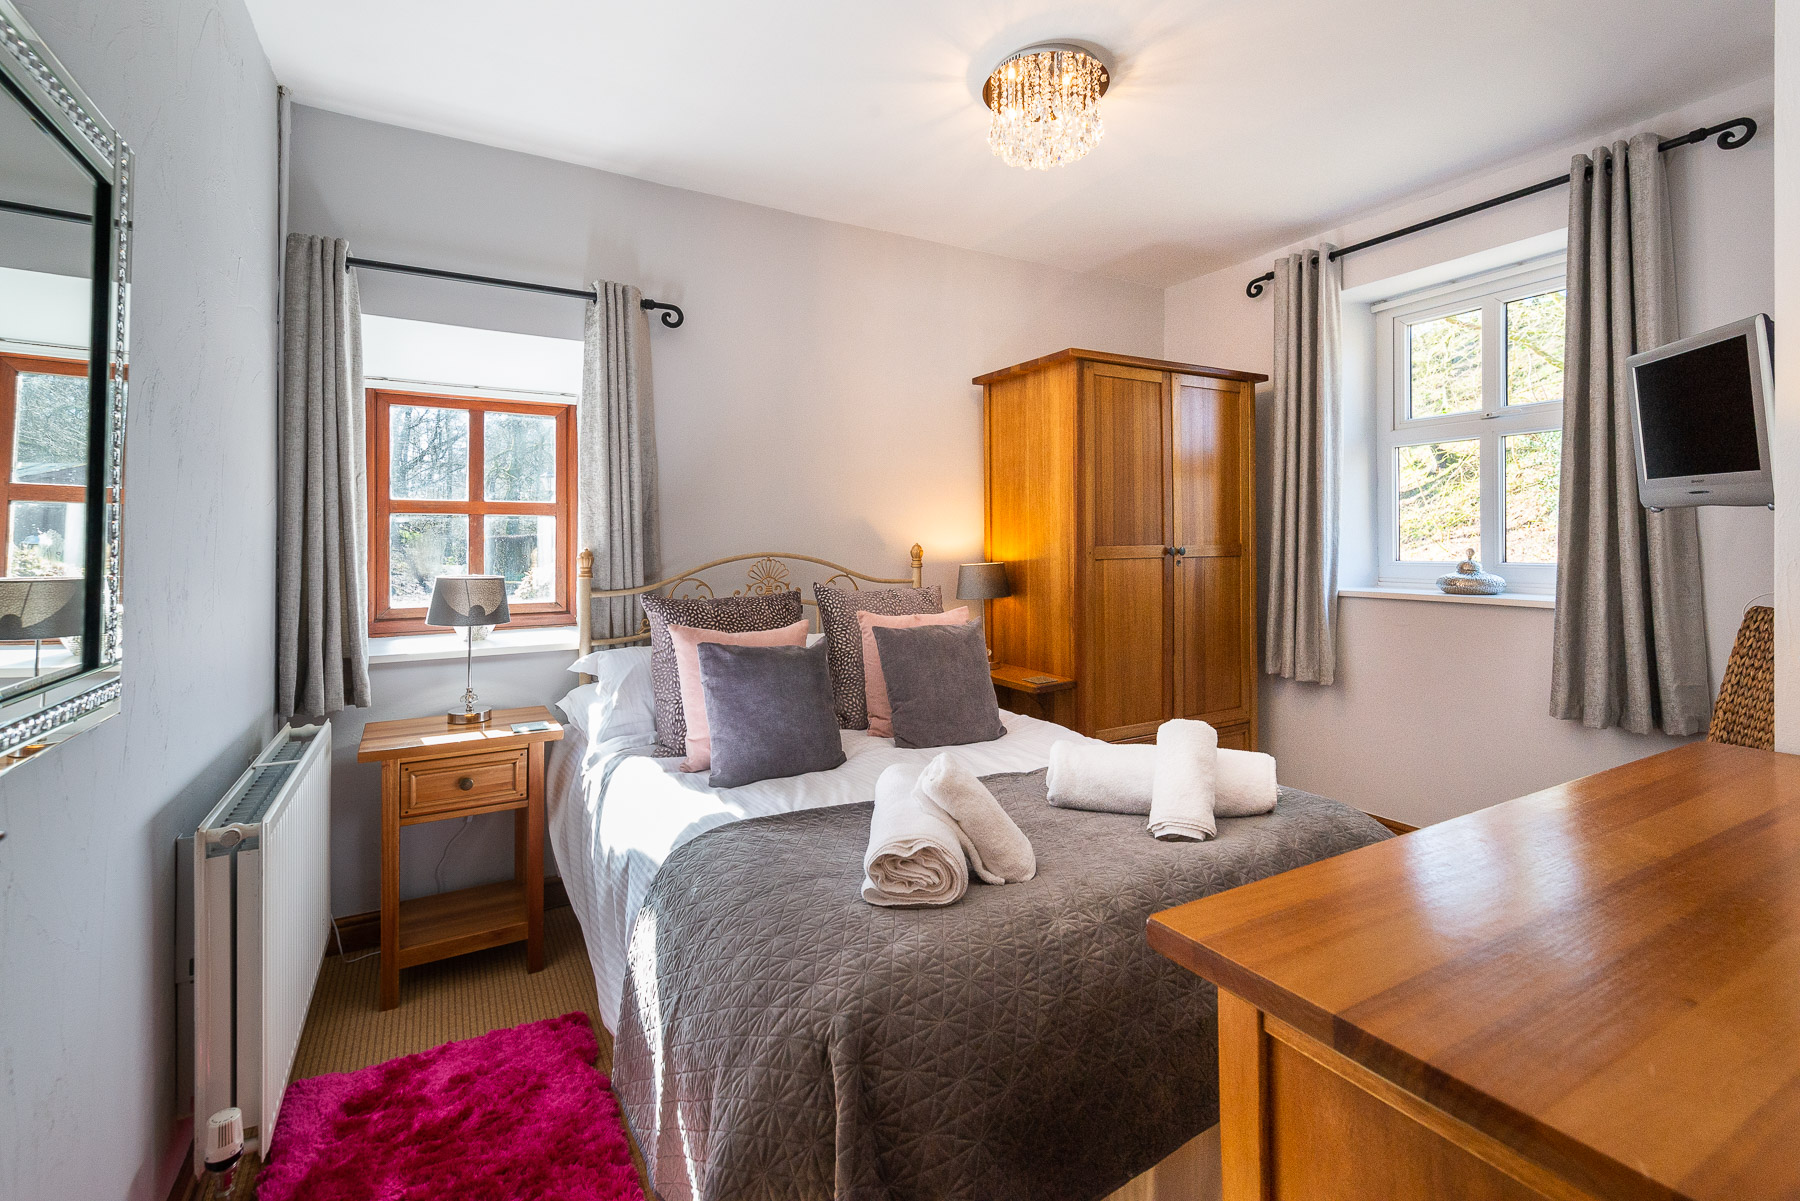 Saddlery bedroom. A boutique Luxury holiday cottage in Lancashire.